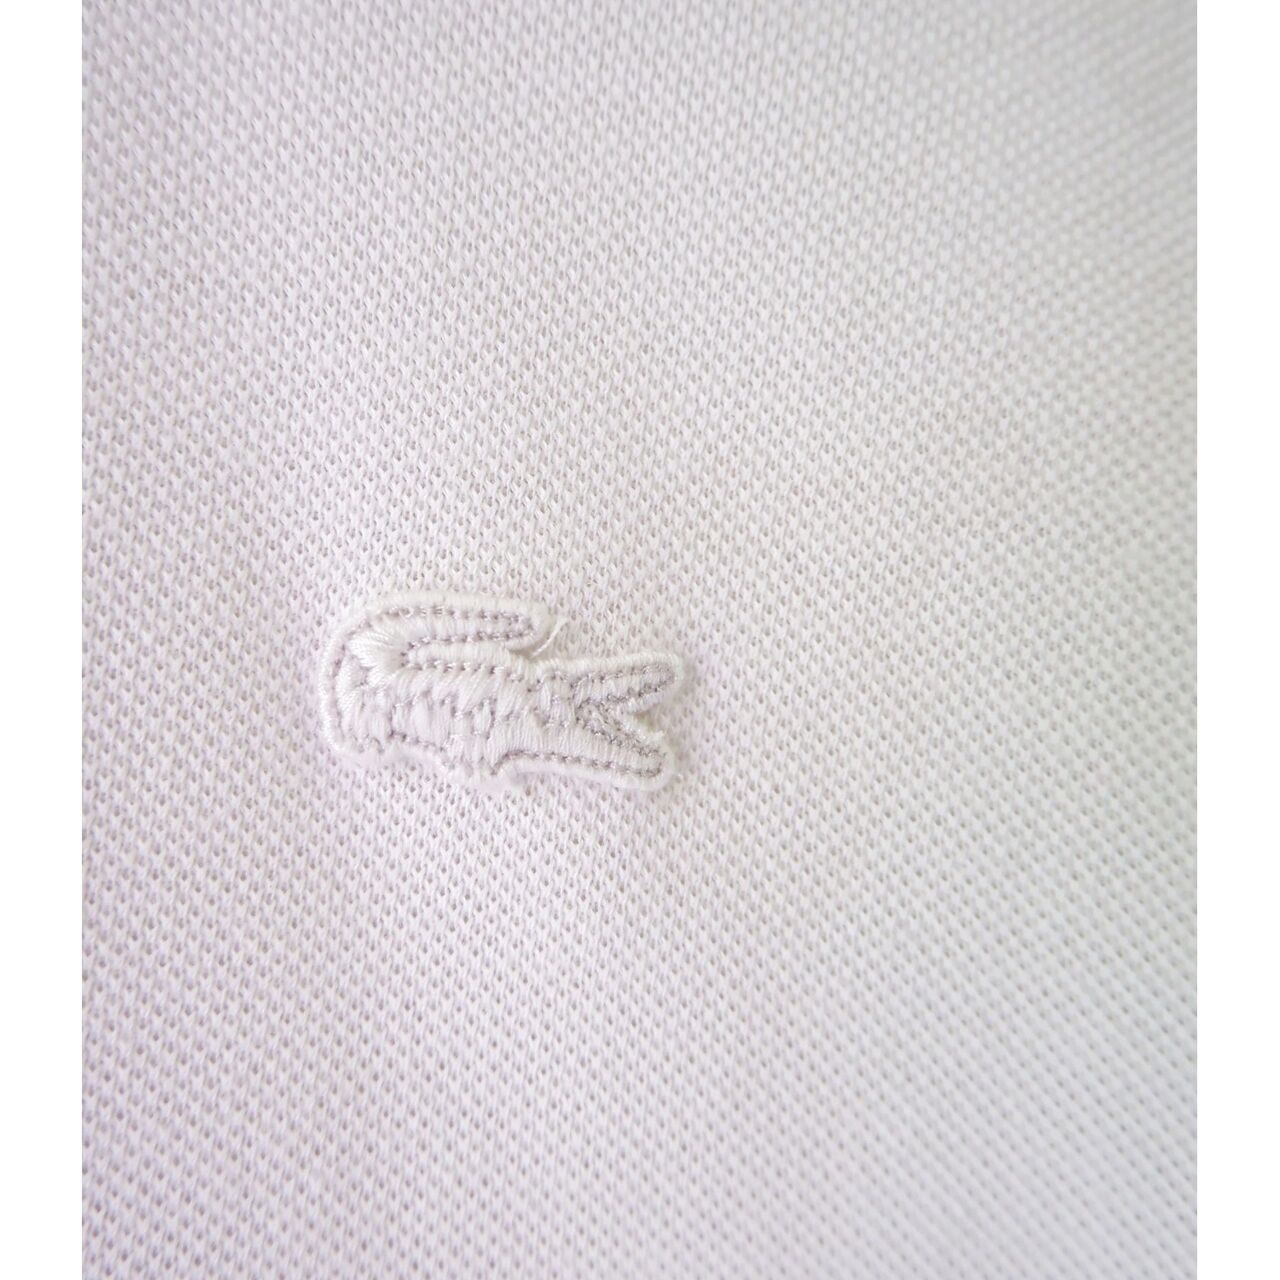 Lacoste Red White Polo T-Shirt 